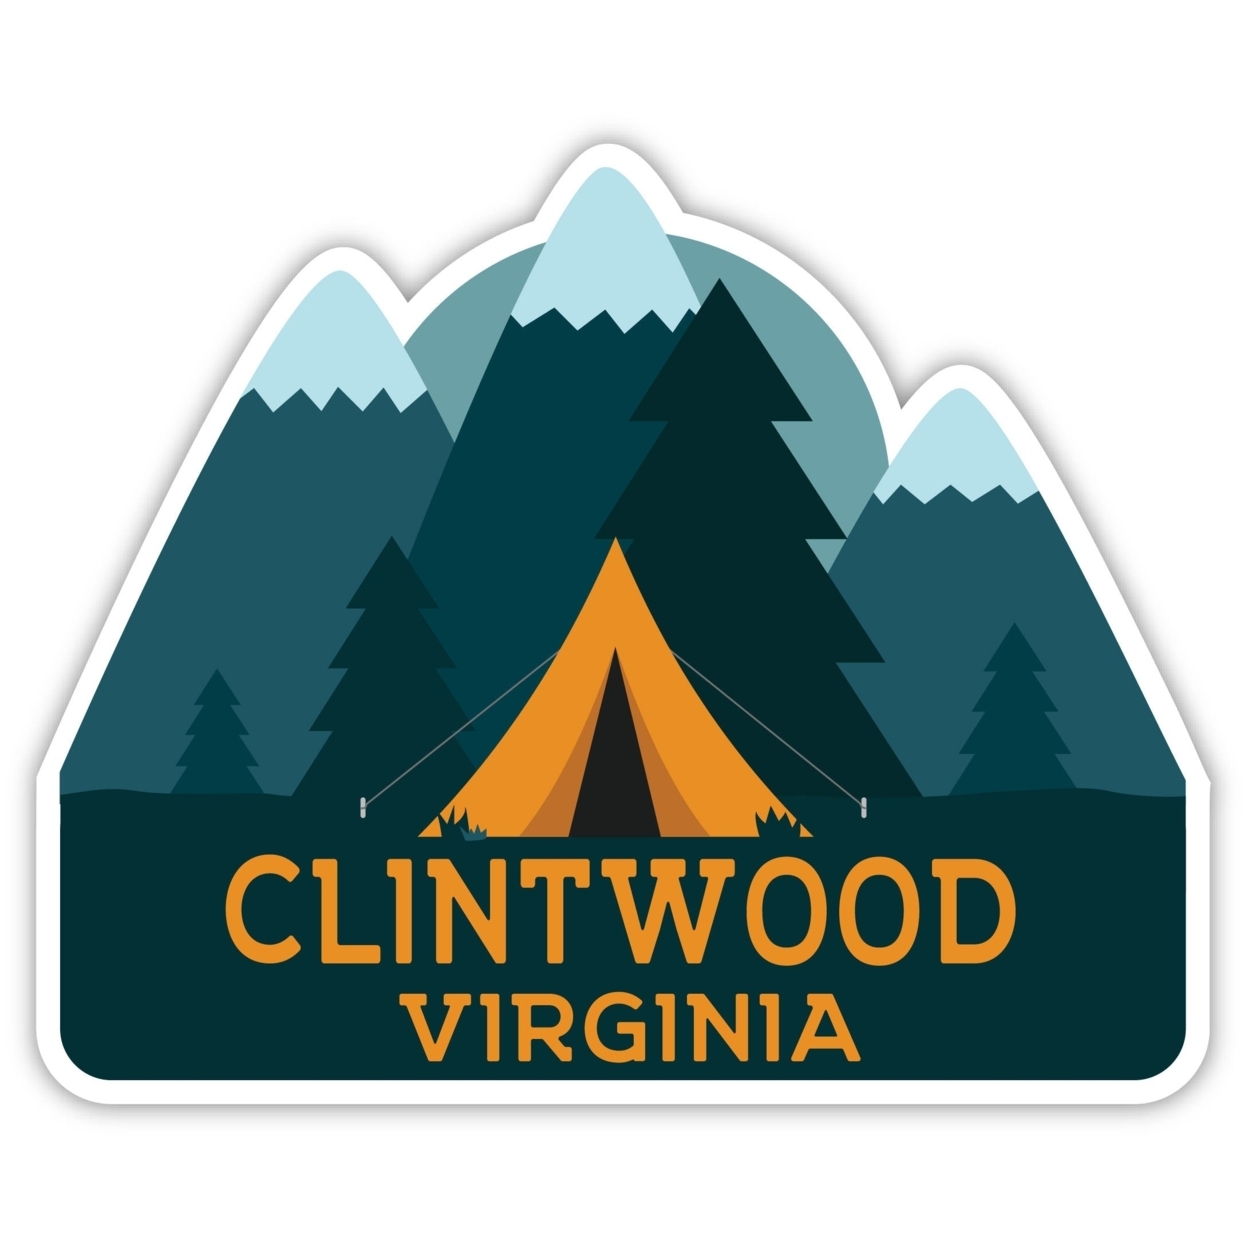 Clintwood Virginia Souvenir Decorative Stickers (Choose Theme And Size) - 4-Pack, 4-Inch, Tent